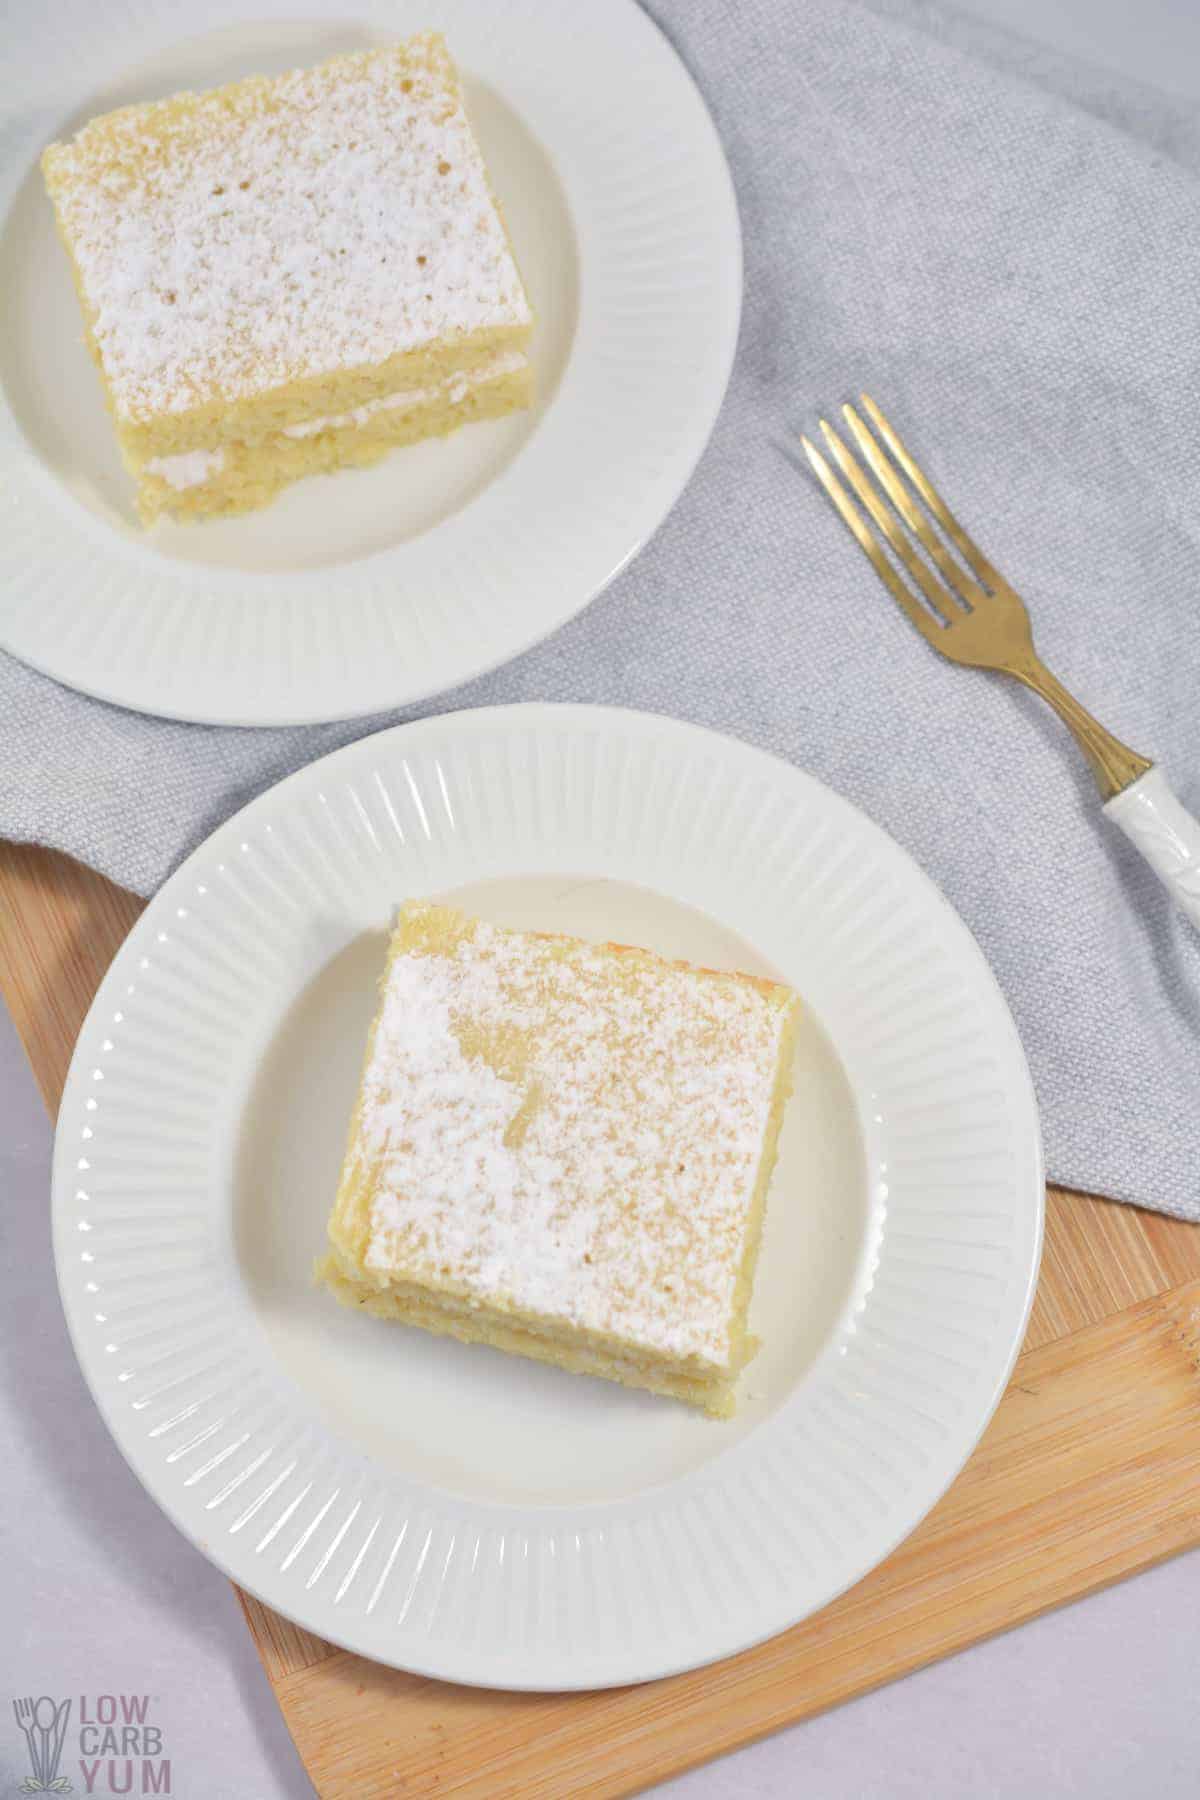 serving cake slices on small white plates.